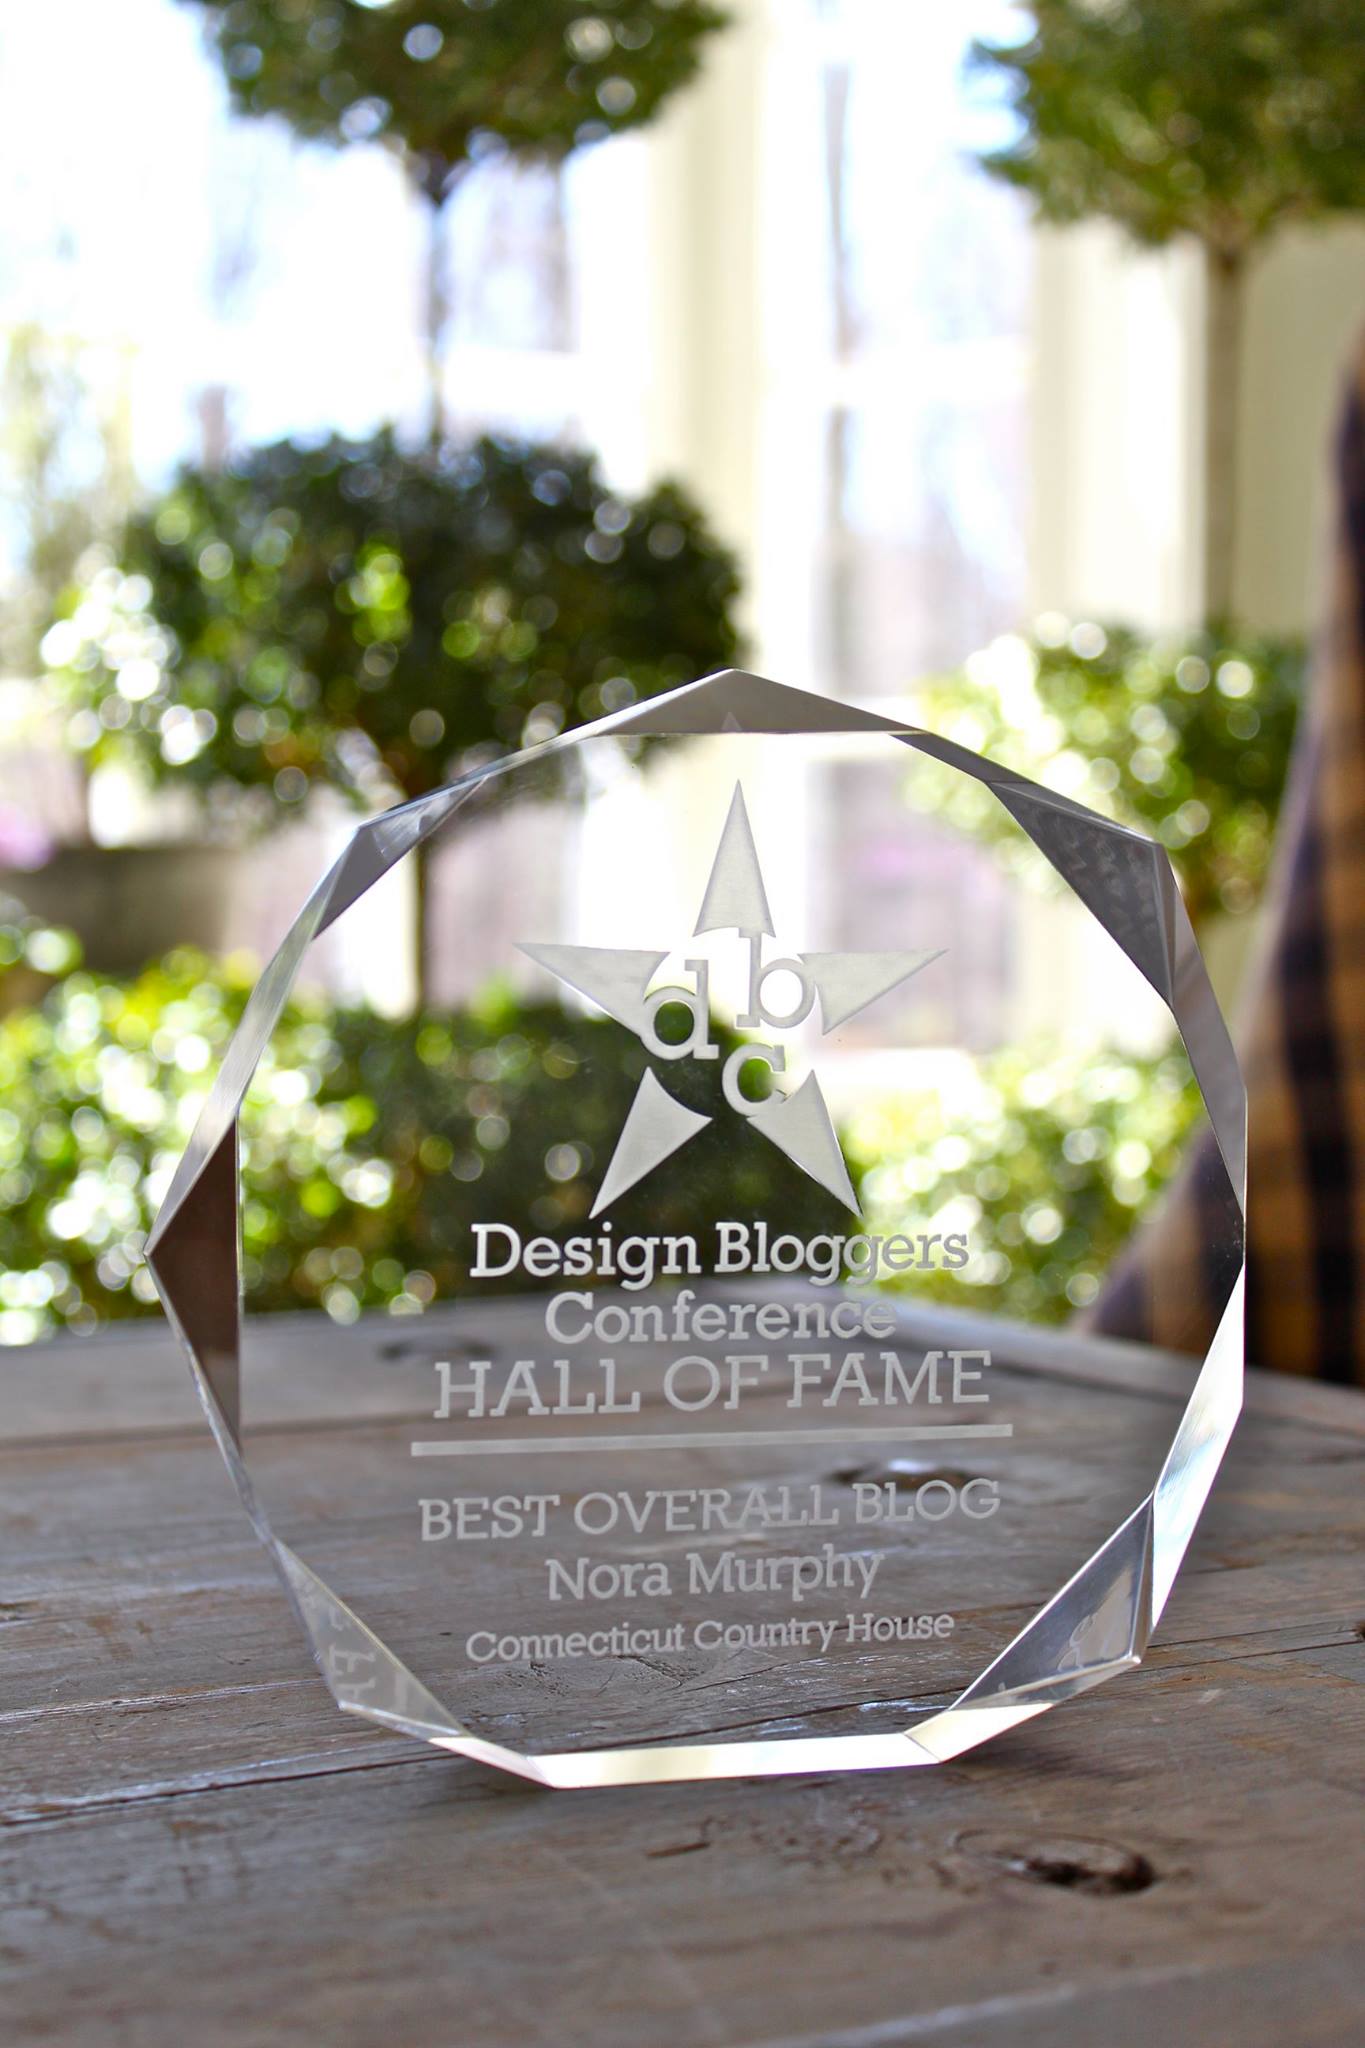 Design Bloggers Conference Best Overall Blog